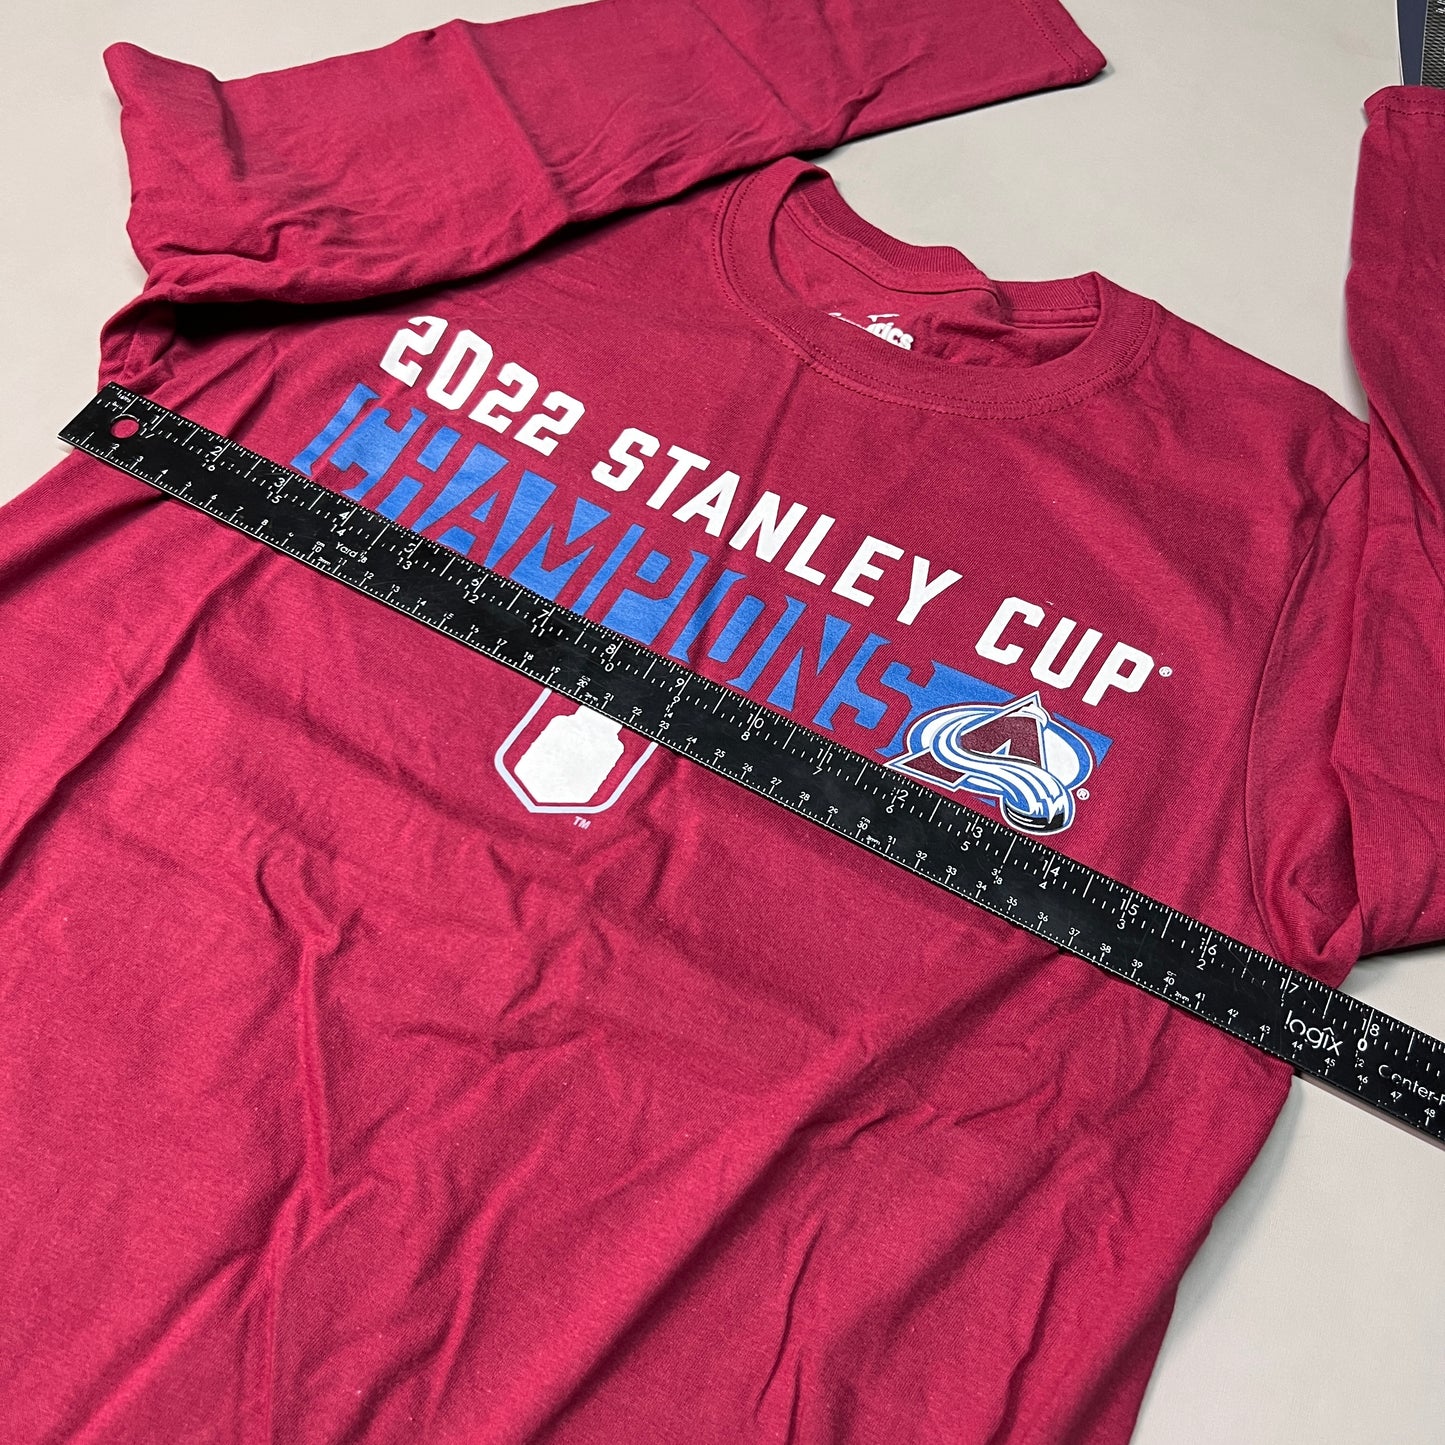 FANATICS 2022 Stanley Cup Champions Colorado Avalanche Long Sleeve T-shirt Sz S Burgundy 058N SC Champs (New)